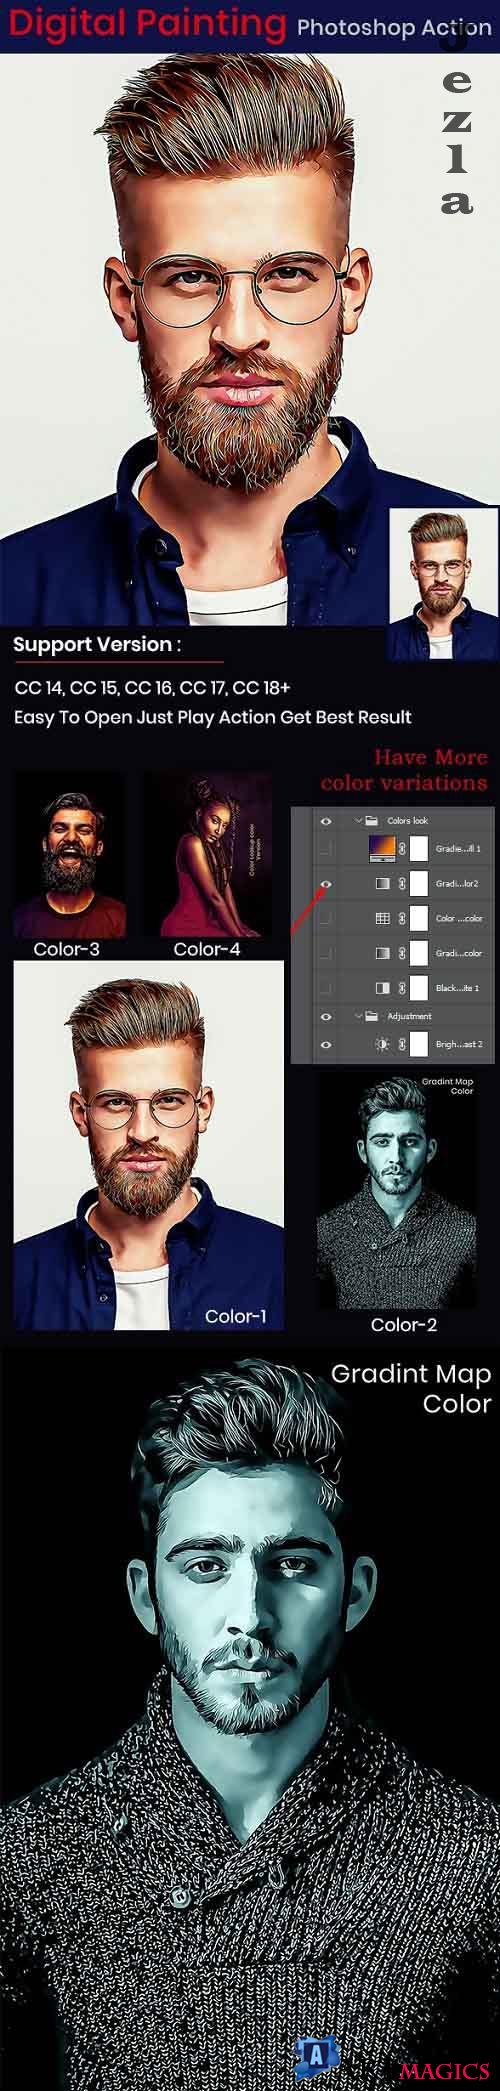 GraphicRiver - Digital Painting Photoshop Action 29902686